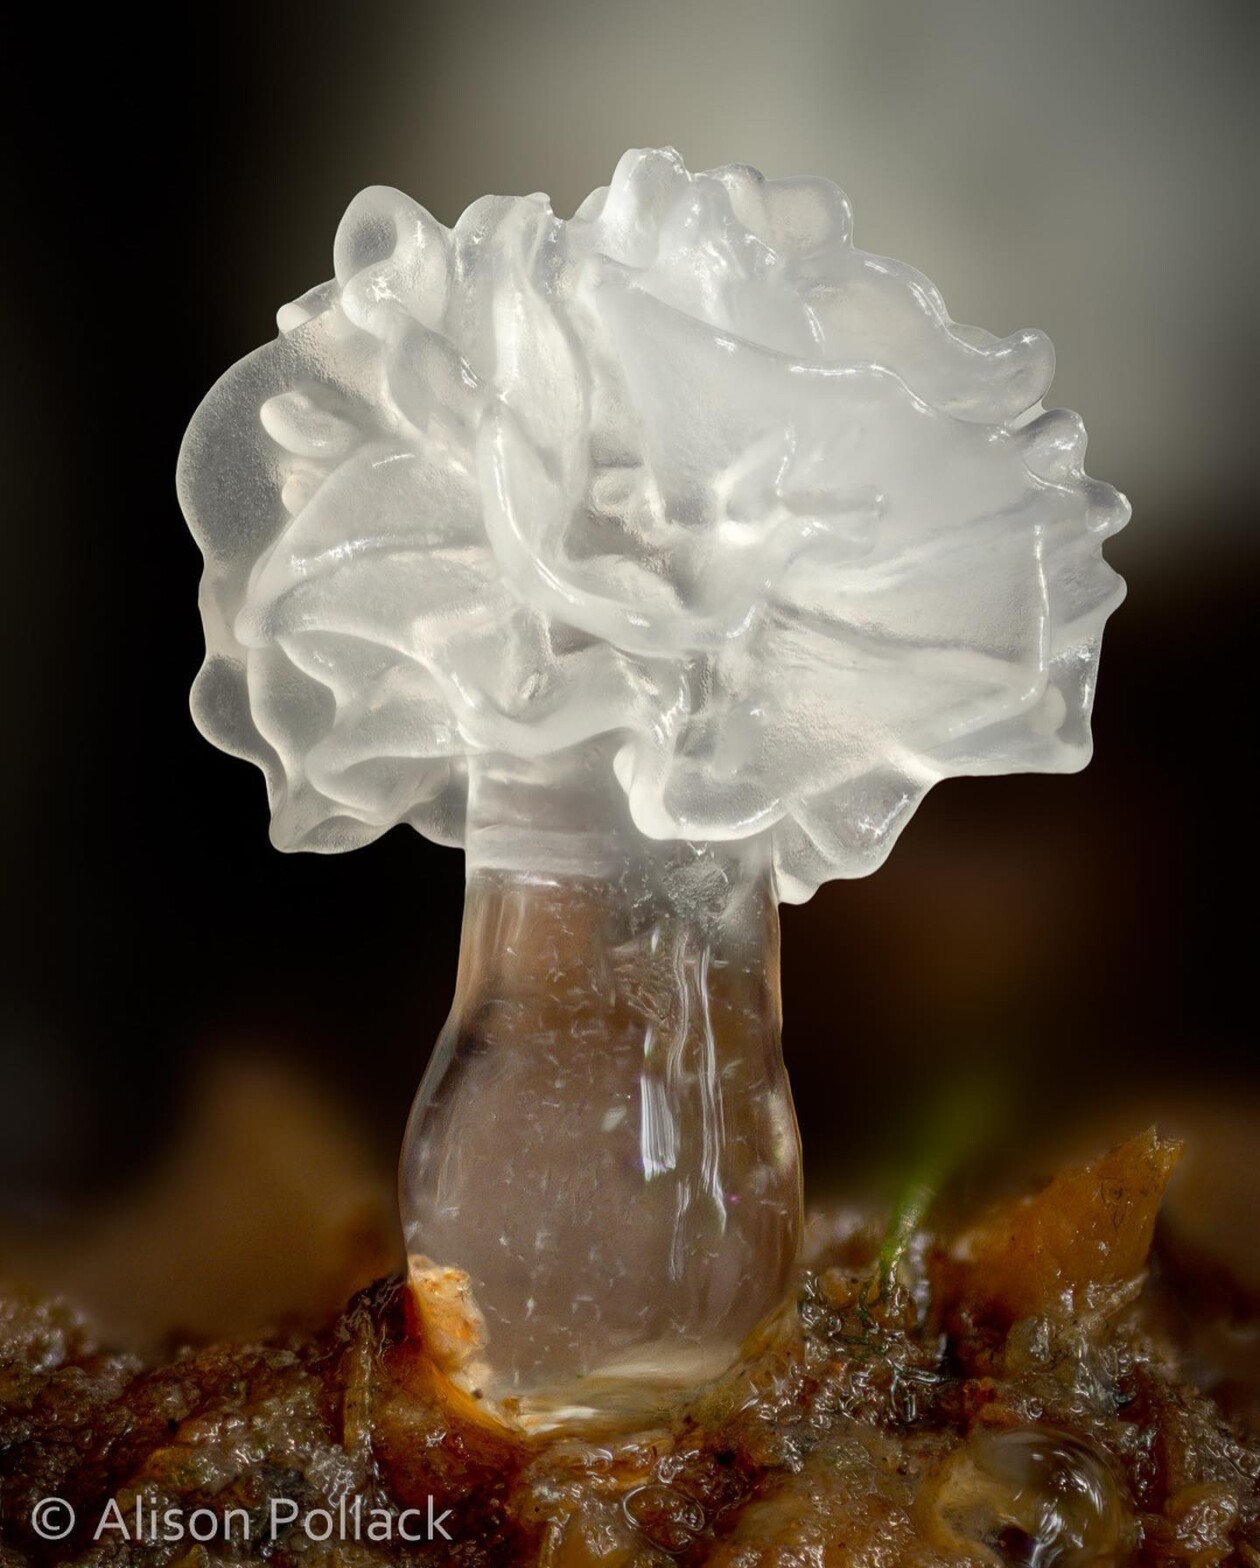 The Microscopic Majesty Of Mushrooms And Molds Captured By Alison Pollack (3)